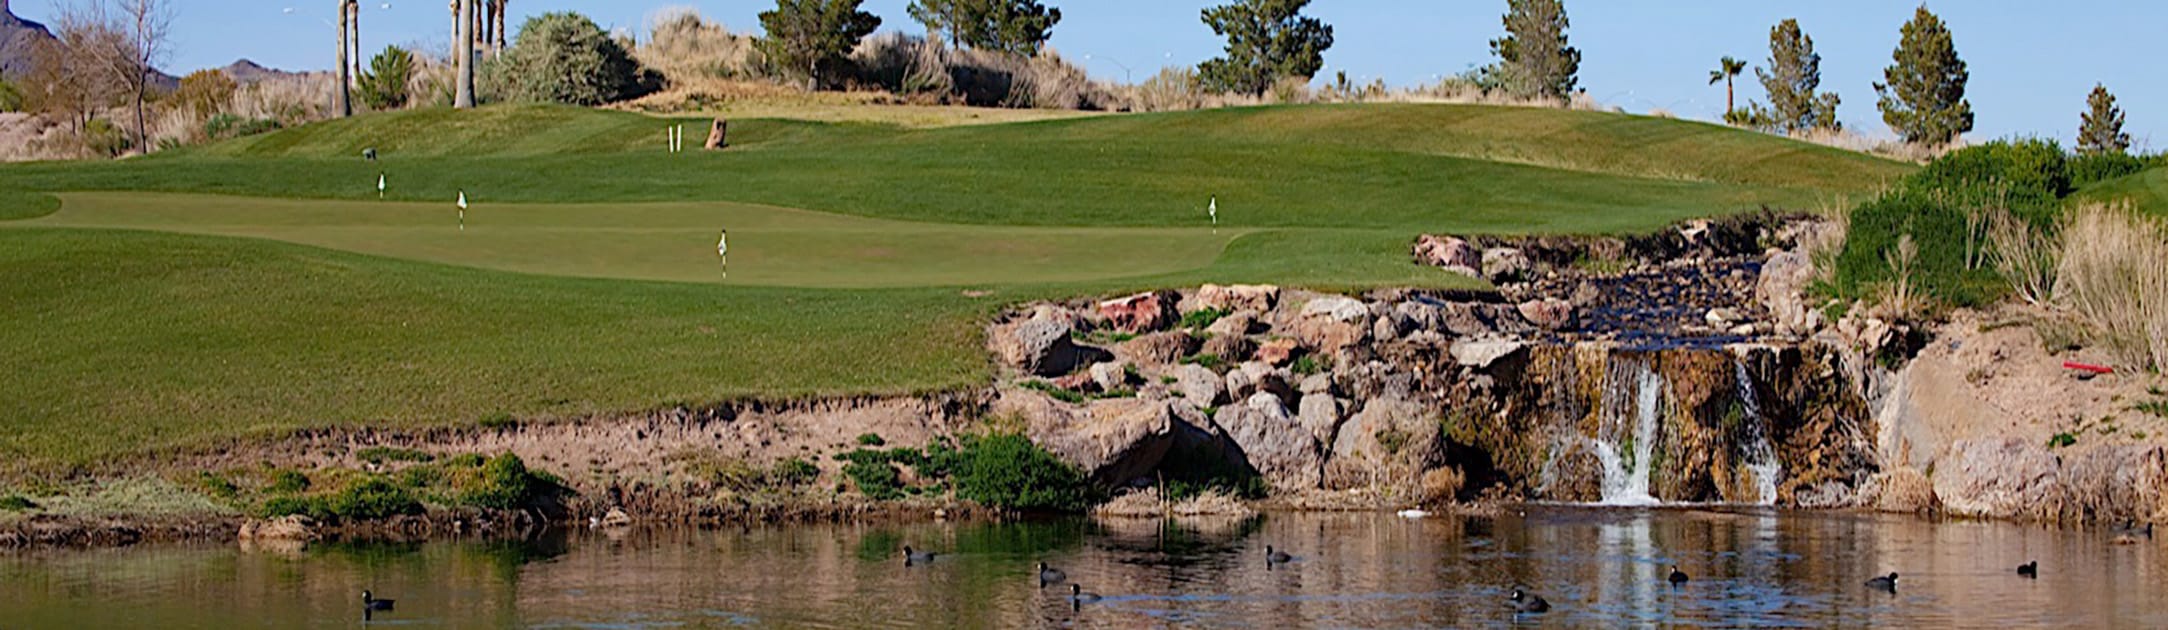 Golf course with trees and rock waterfalls into a lake.